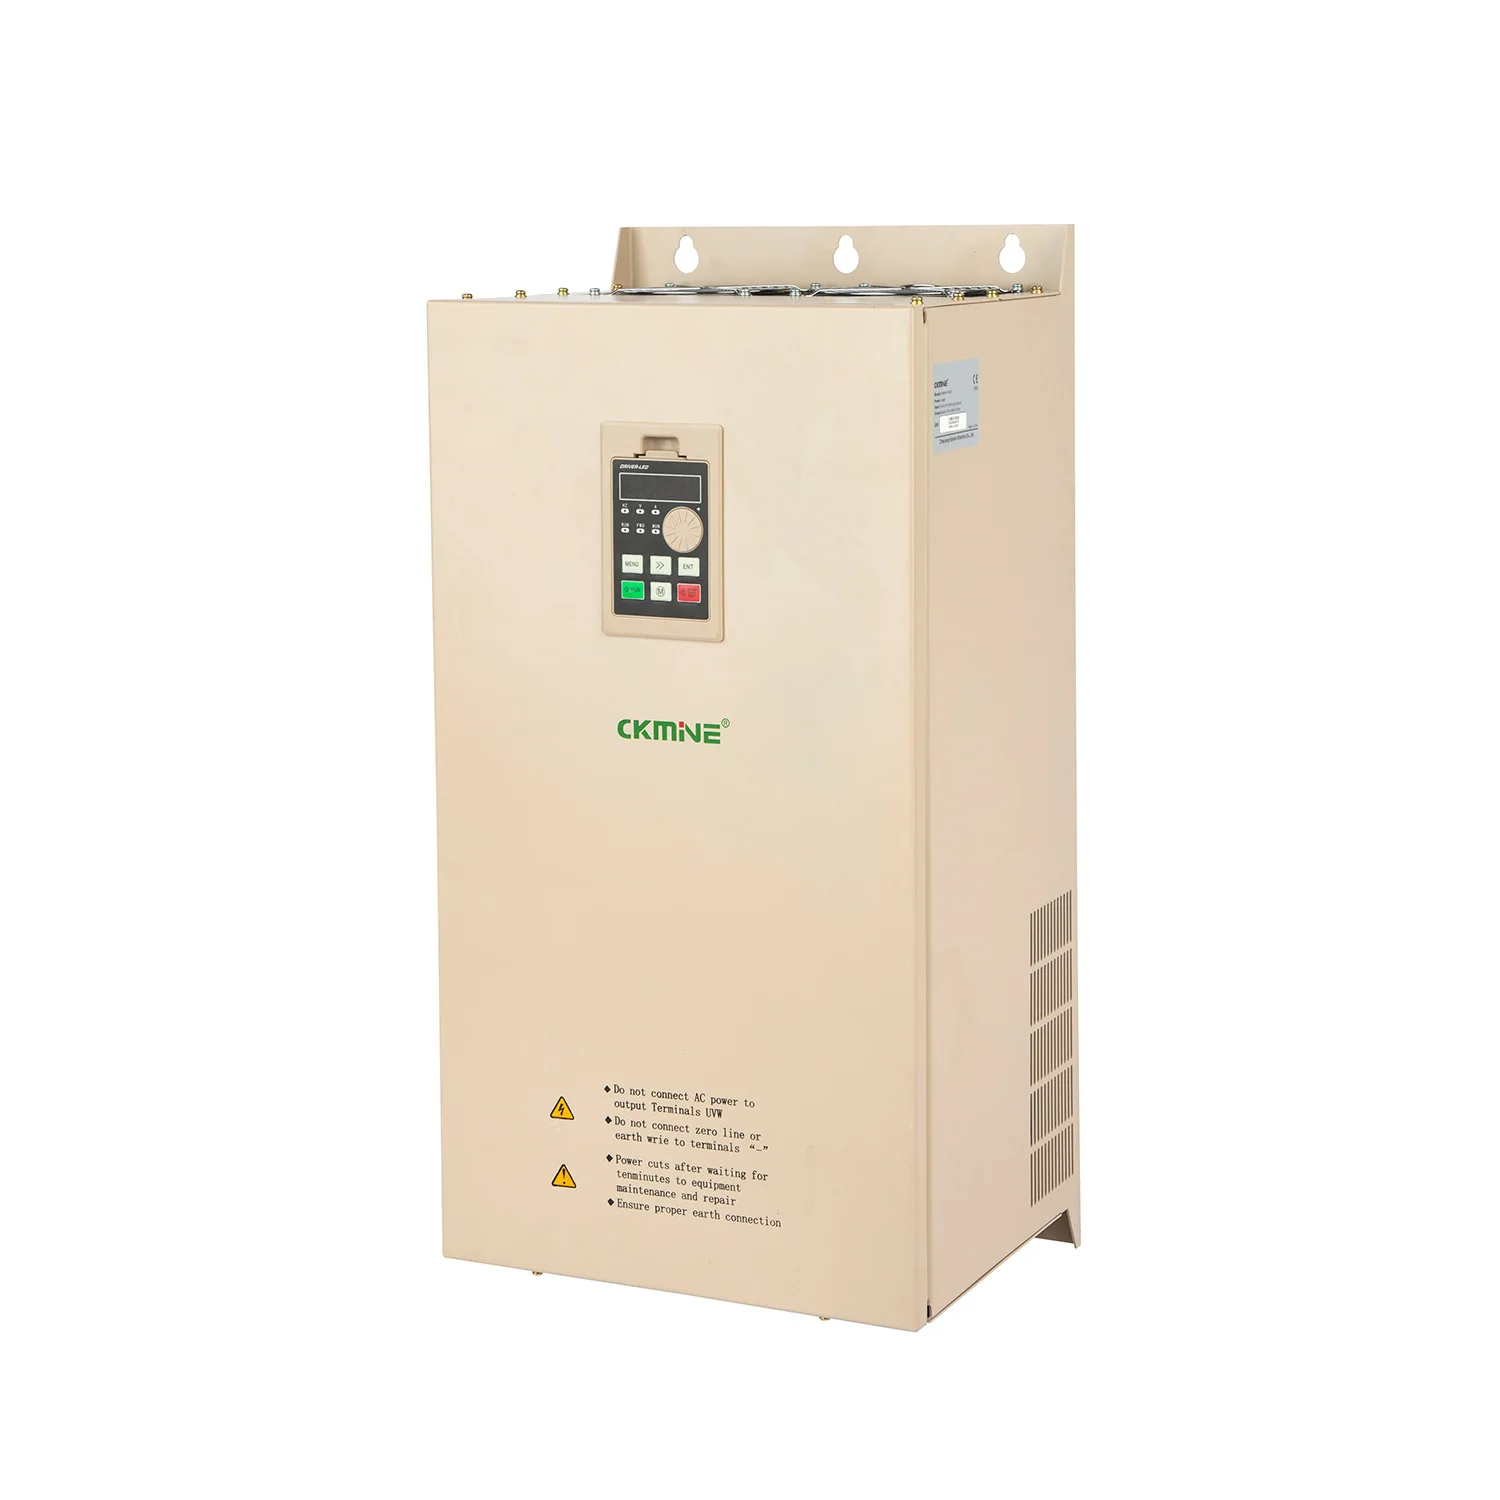 CKMINE Multifunctional 45kW 60HP Motor Inverter Variable Frequency Driver 380V Close Loop Three Phase Speed Control VFD